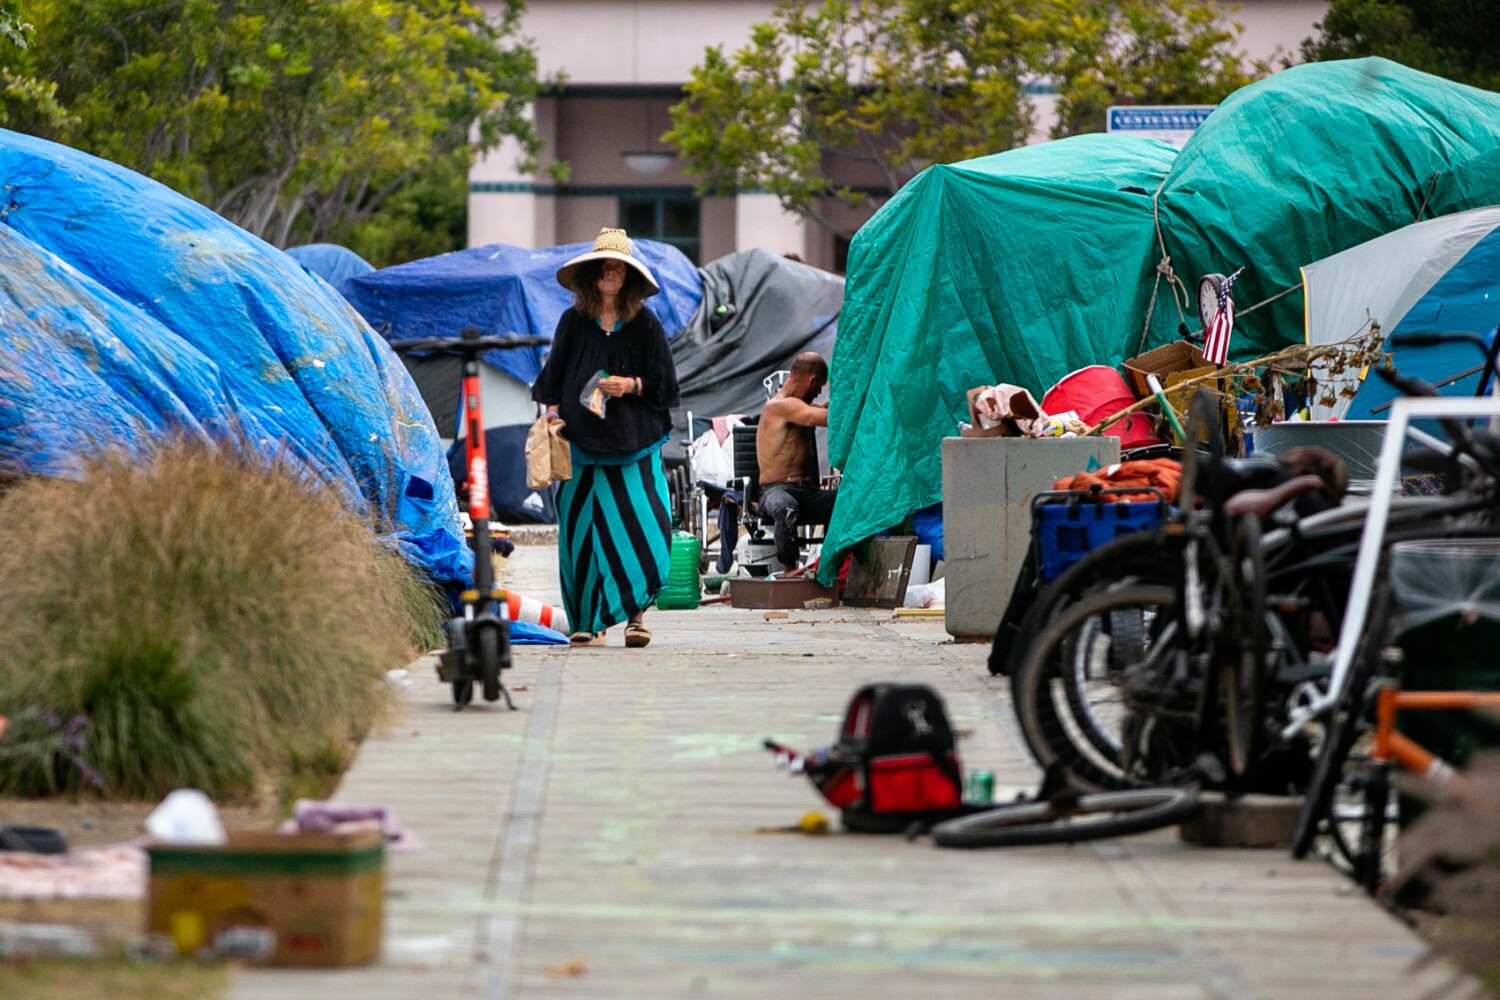 Can Bass or Caruso solve the L.A. homeless housing crisis? Here are their divergent plans